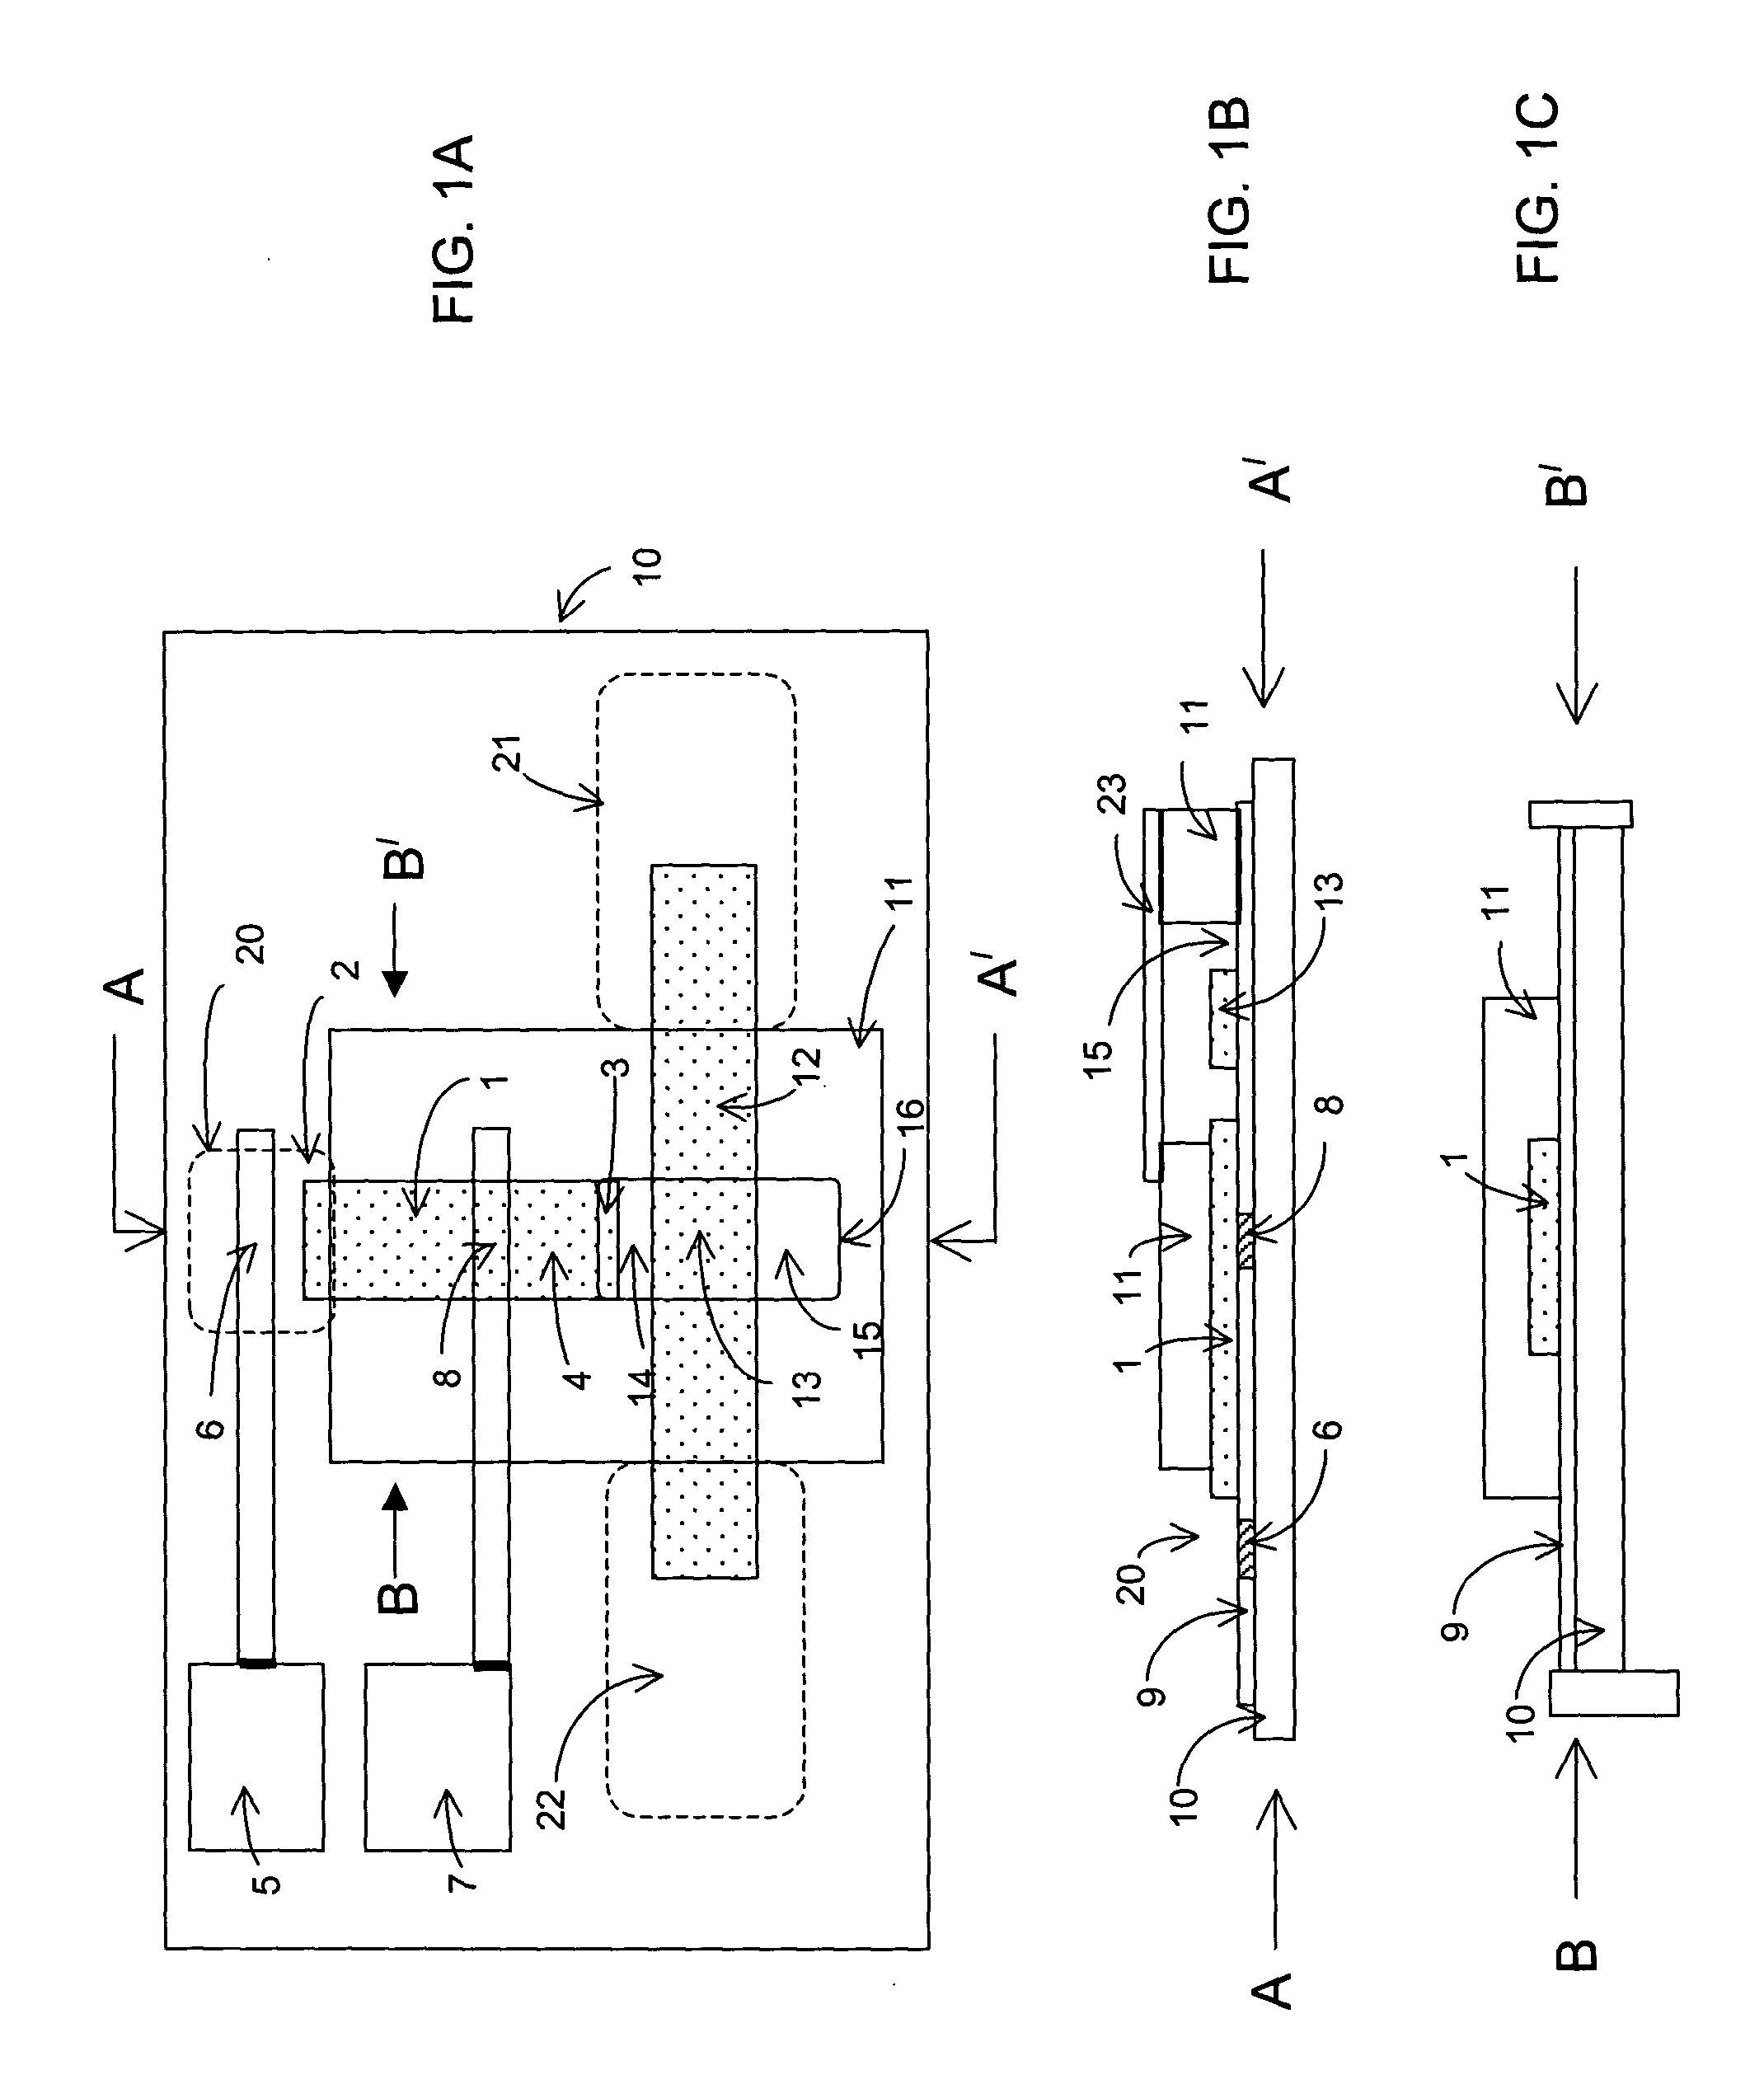 Lateral flow diagnostic devices with instrument controlled fluidics